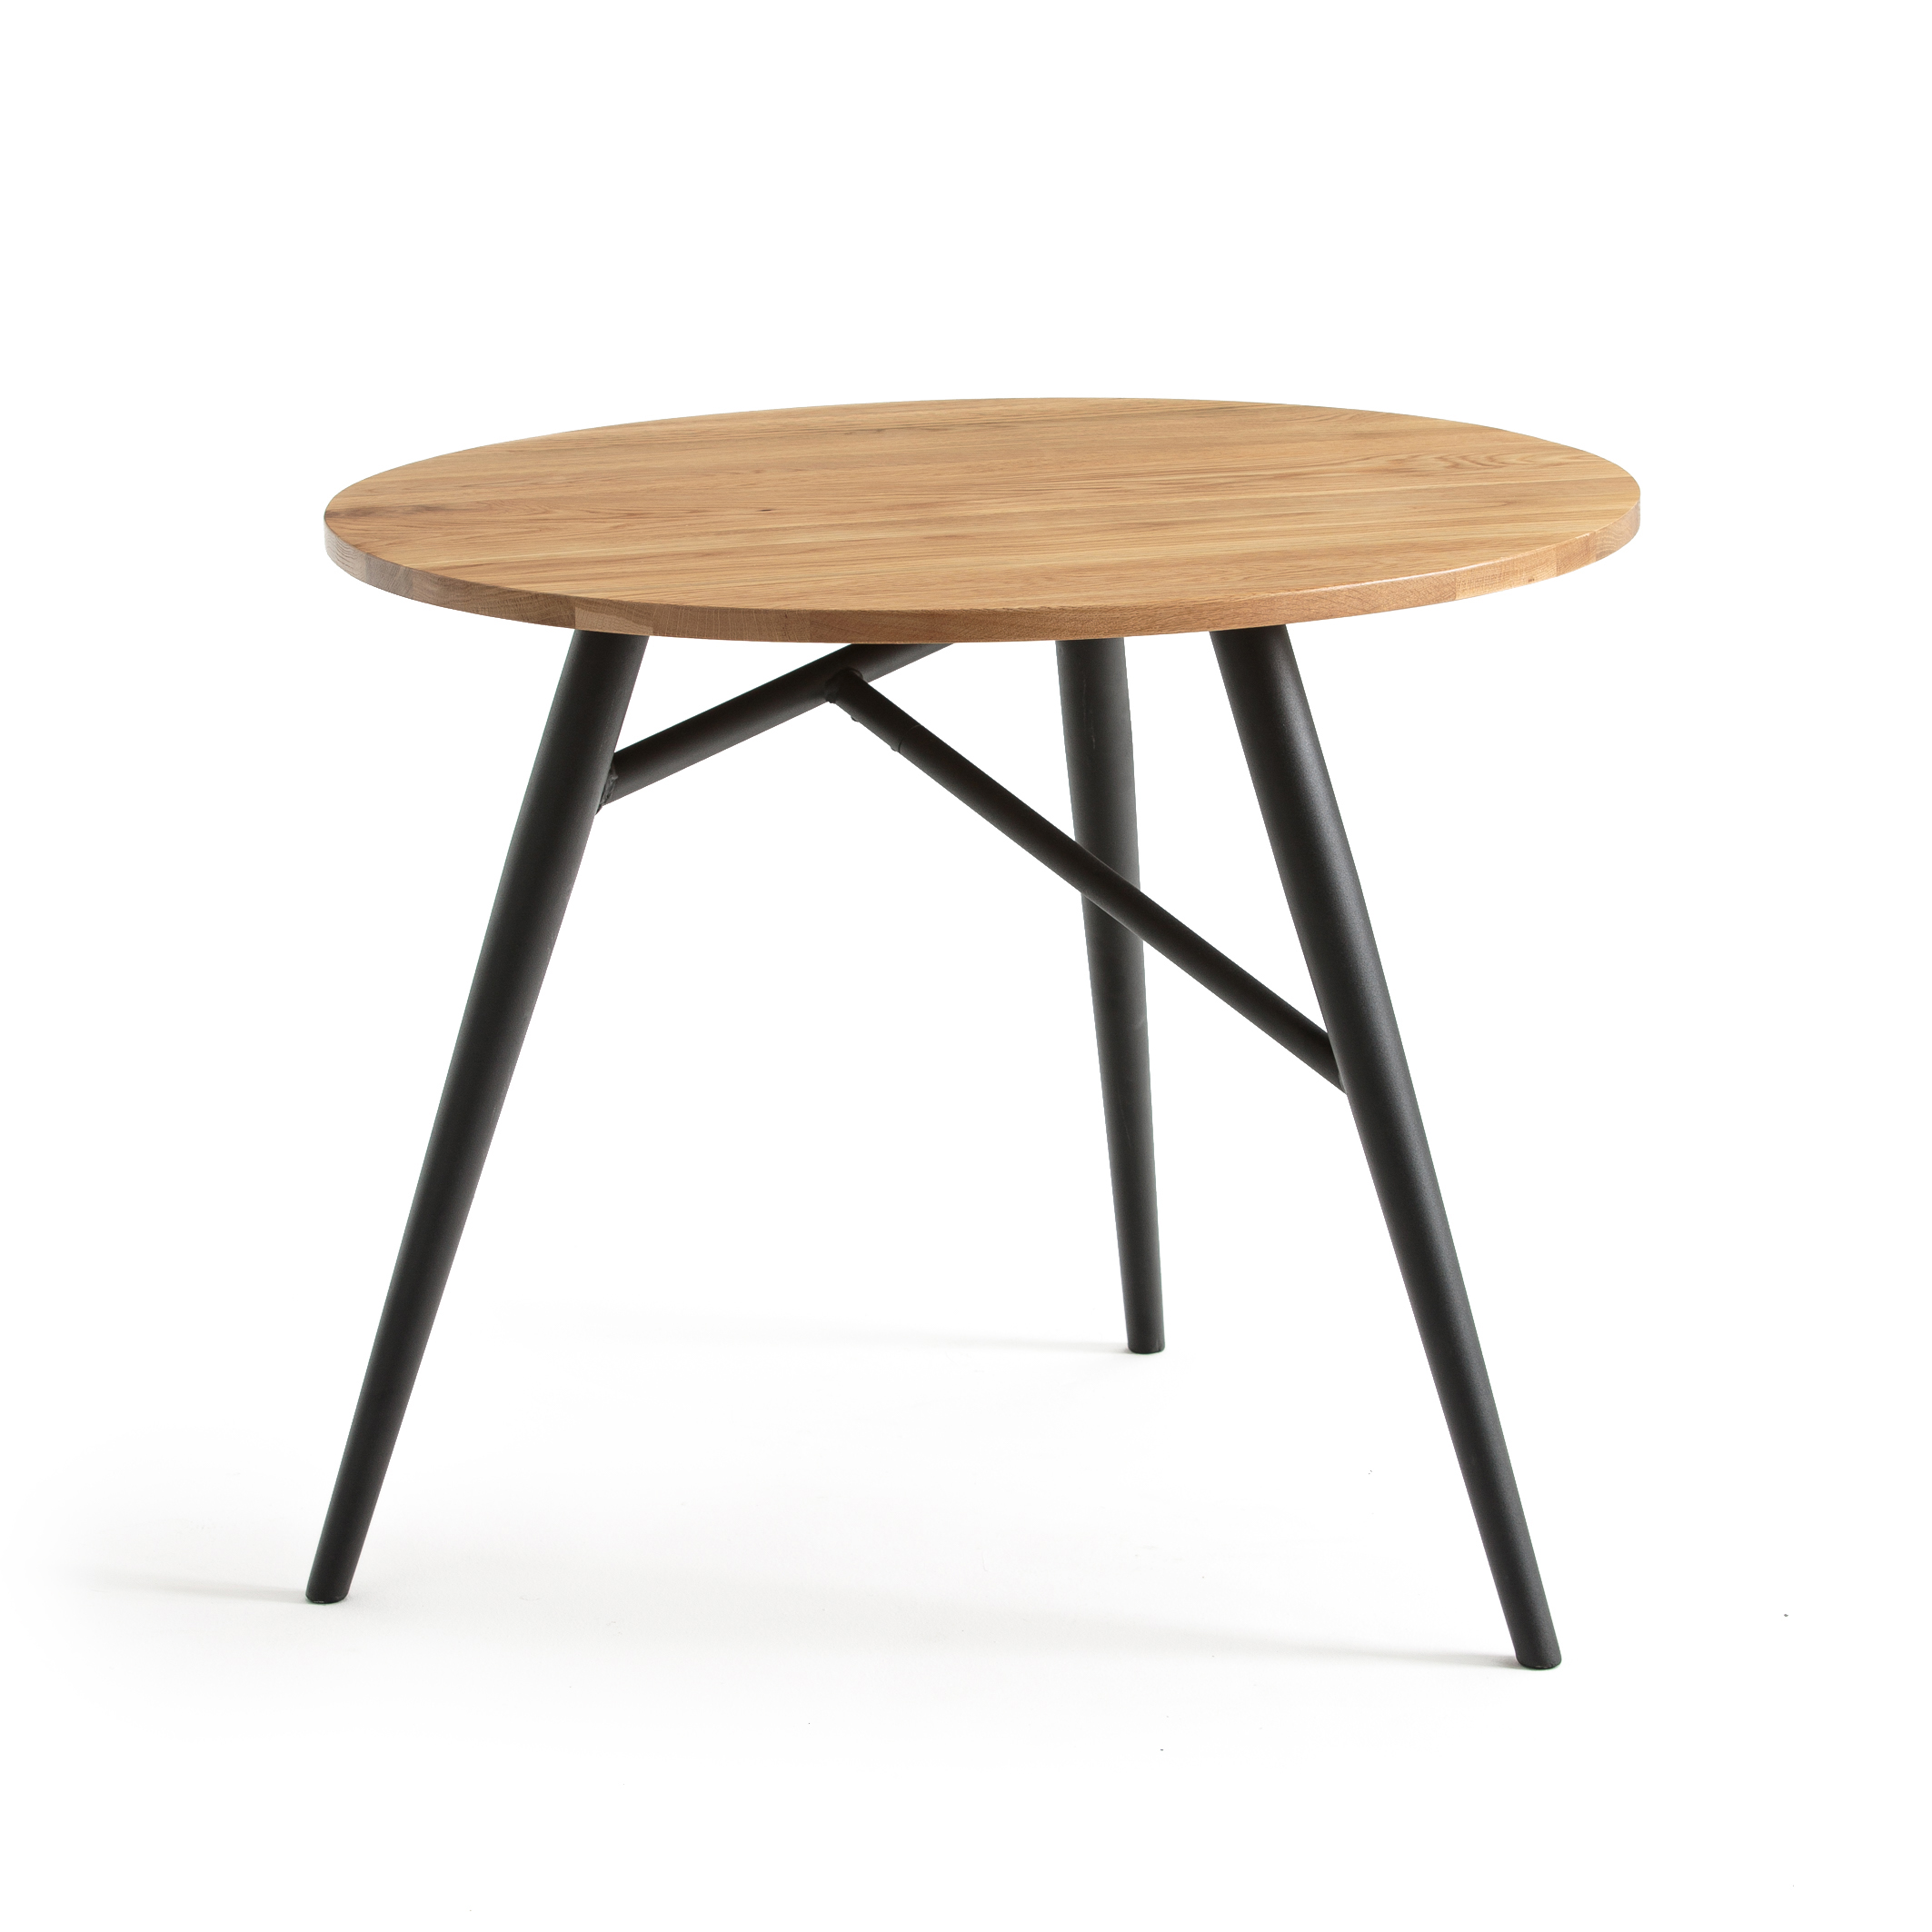 Cruseo Round Oak Dining Table Seats 3, Round Oak Dining Table Seats 6